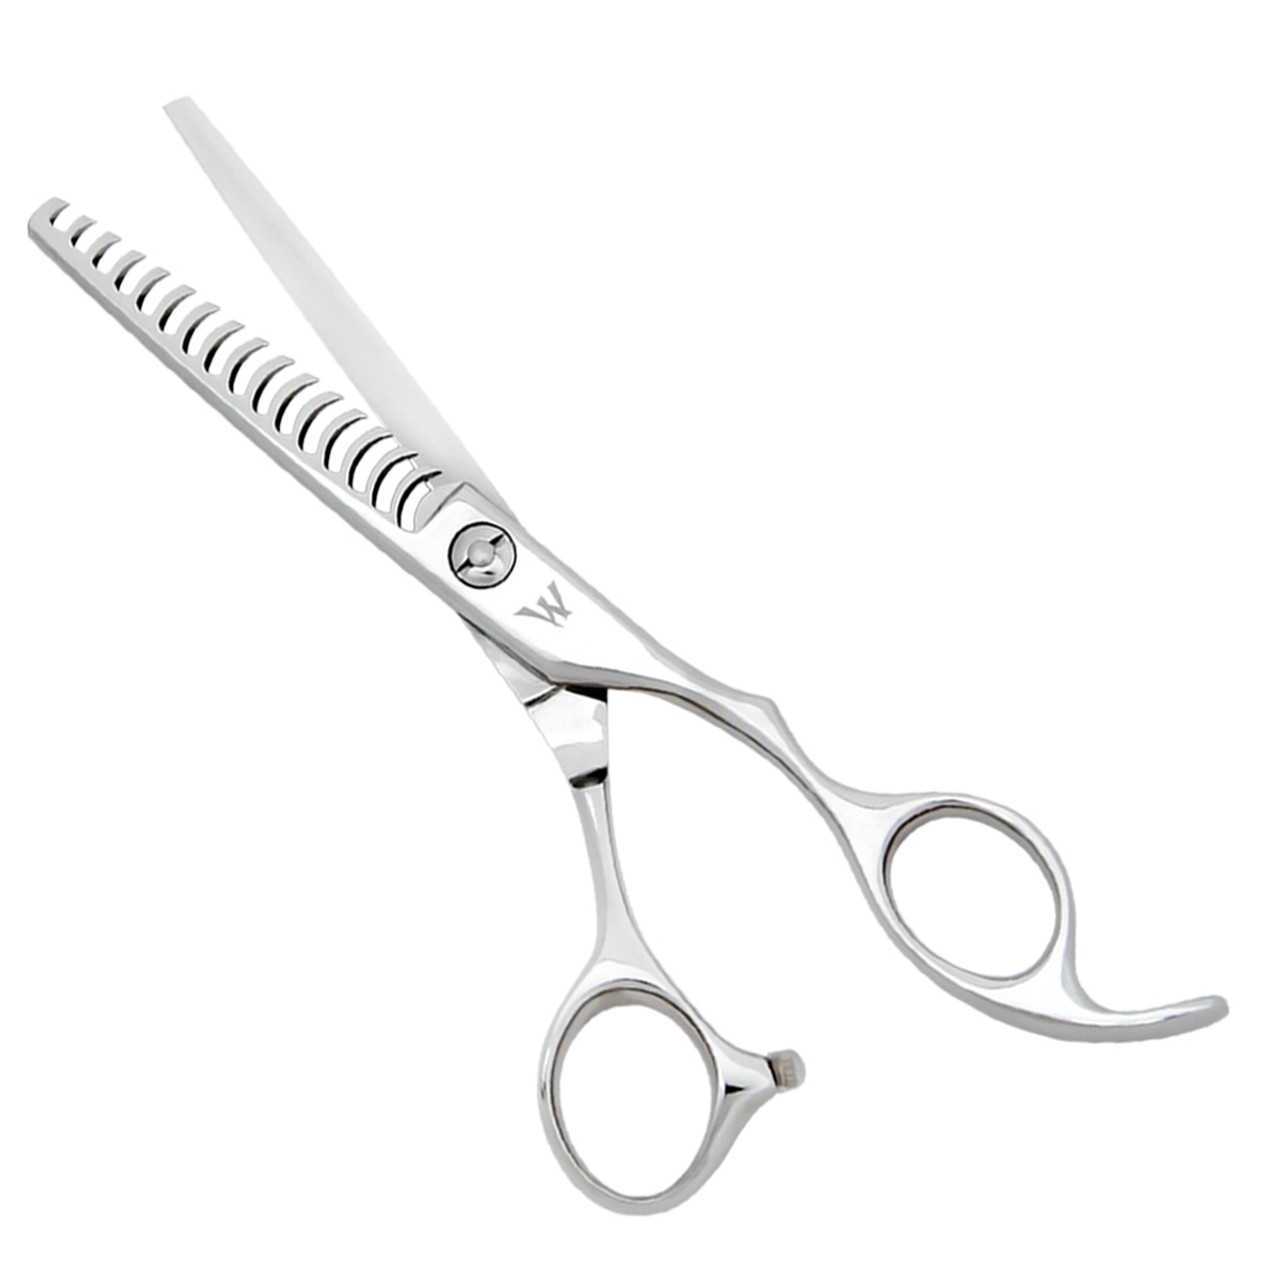 Professional hairdressing scissors with asymmetrical grip - SUPREMA EVO  Collection - PROFESSIONAL li